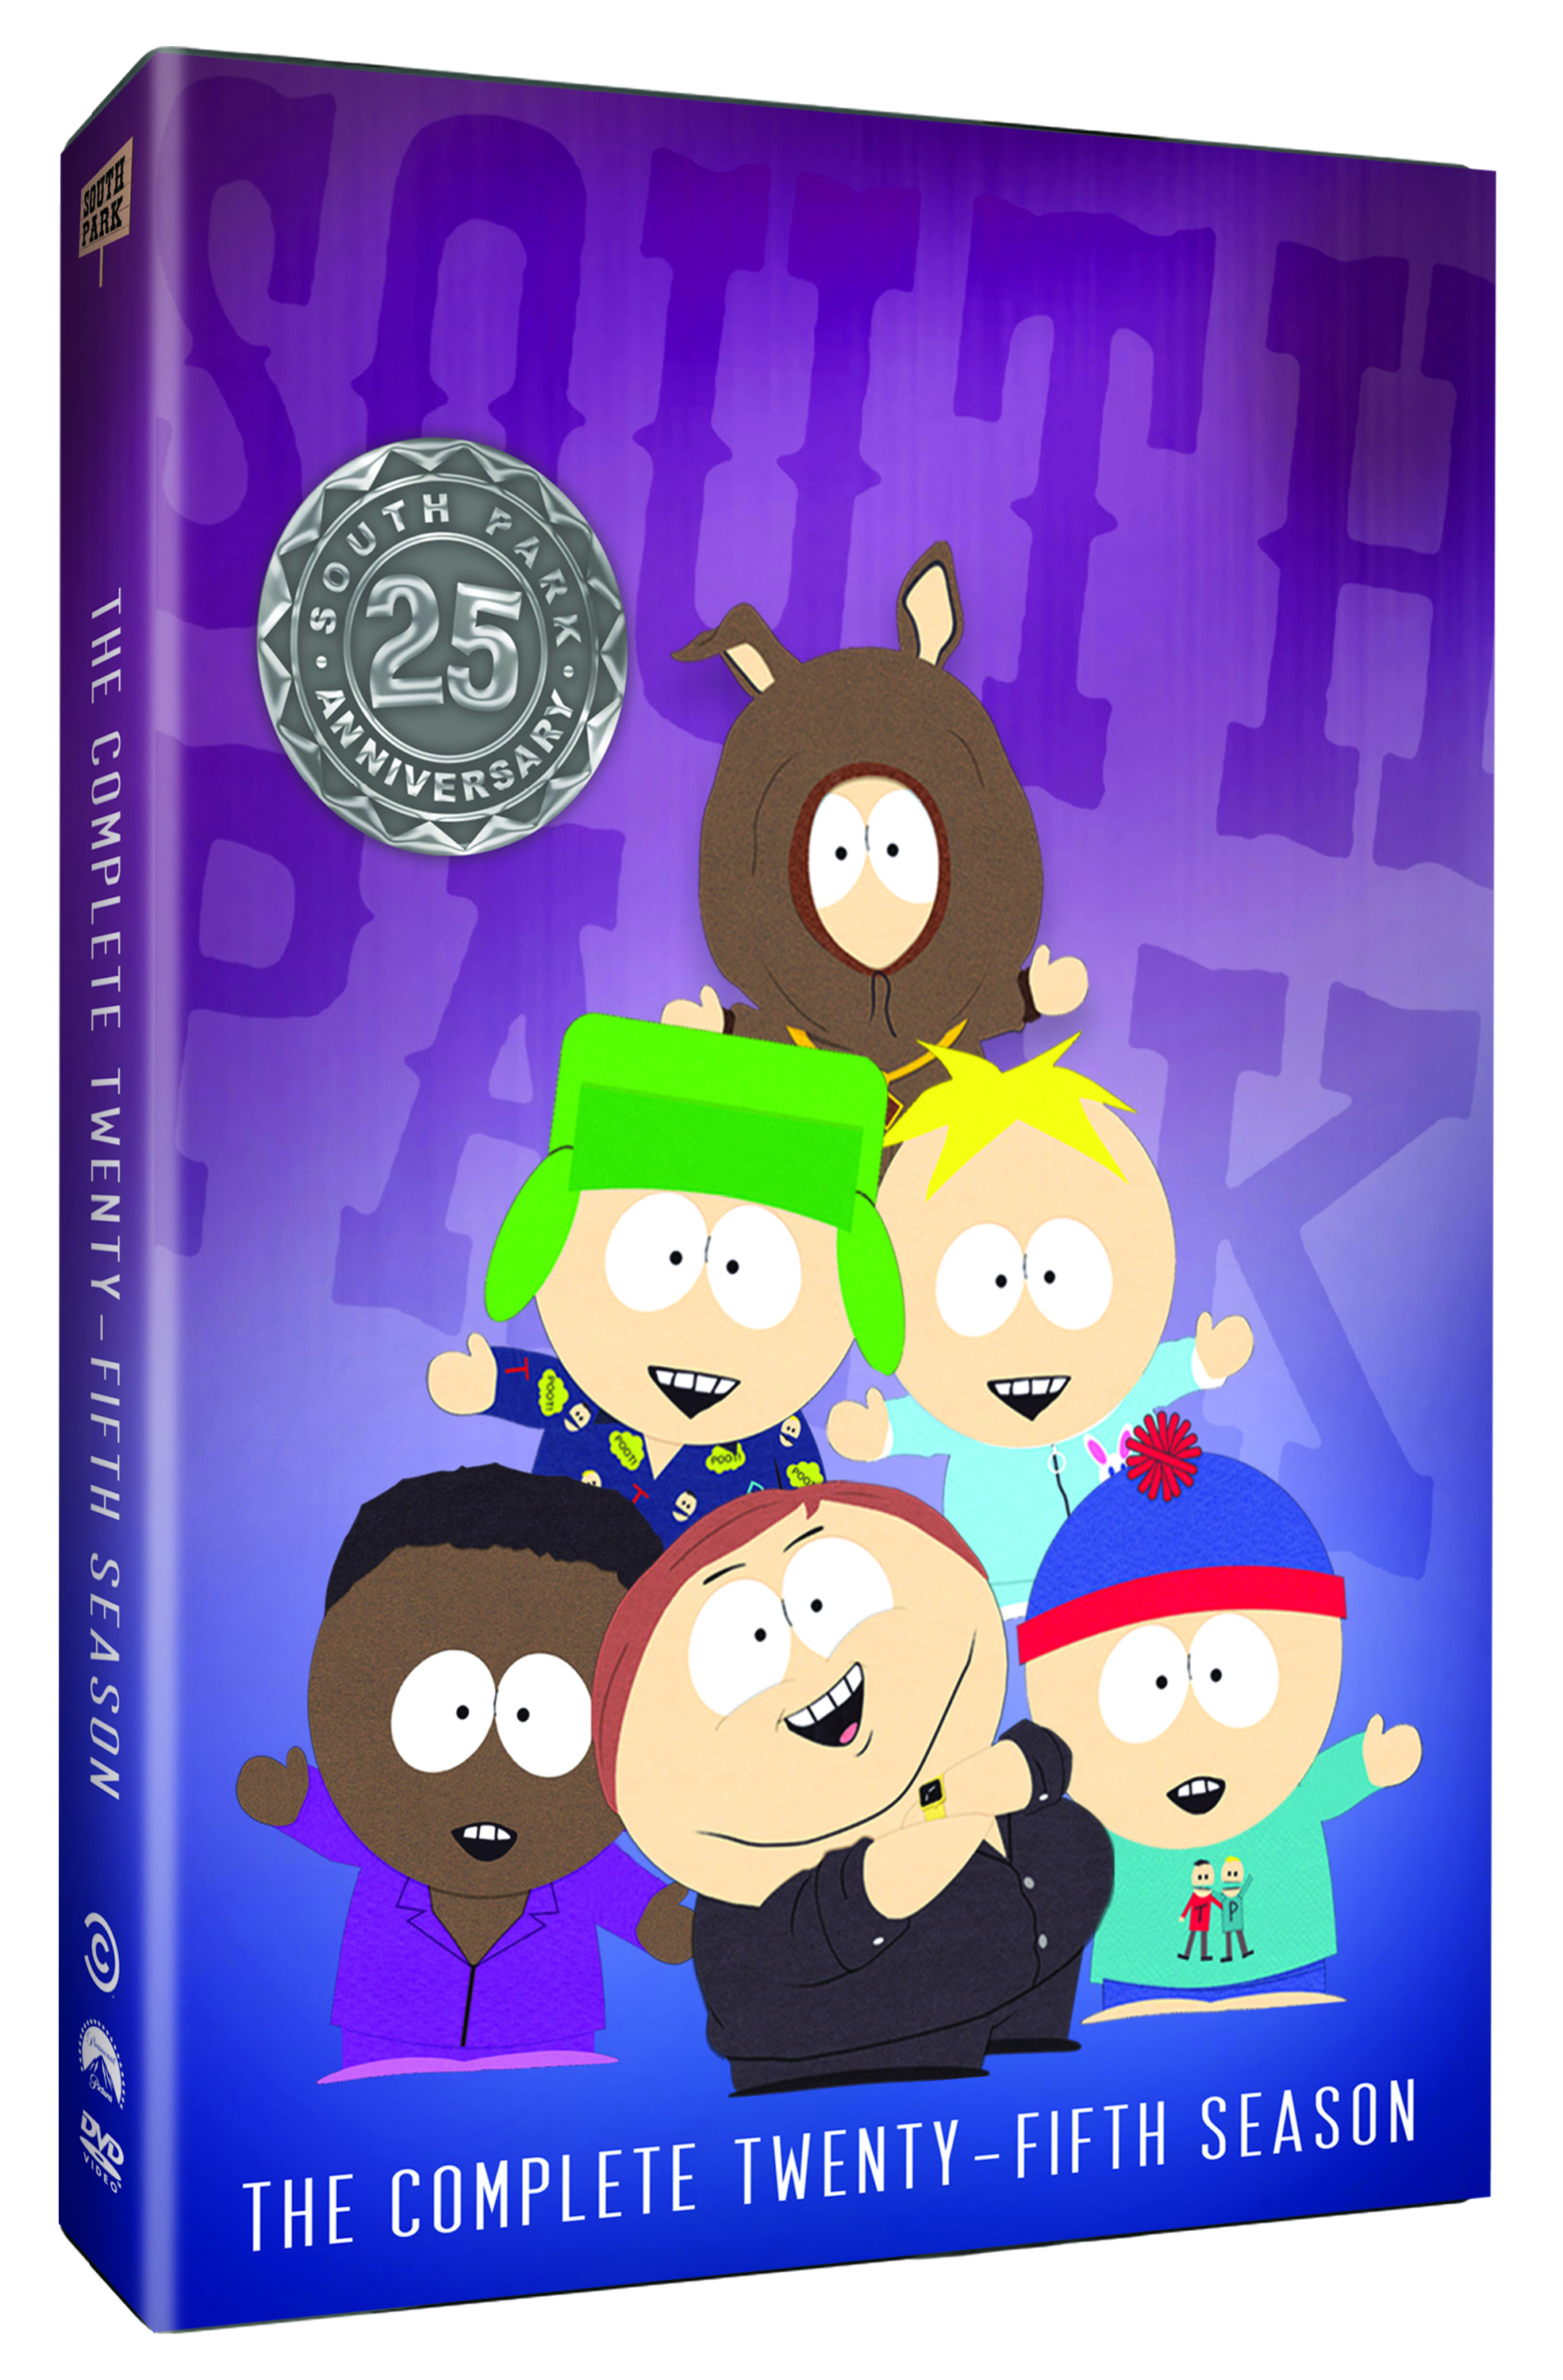 South Park: The Complete Twenty-Fifth Season DVD cover (Paramount Home Entertainment)